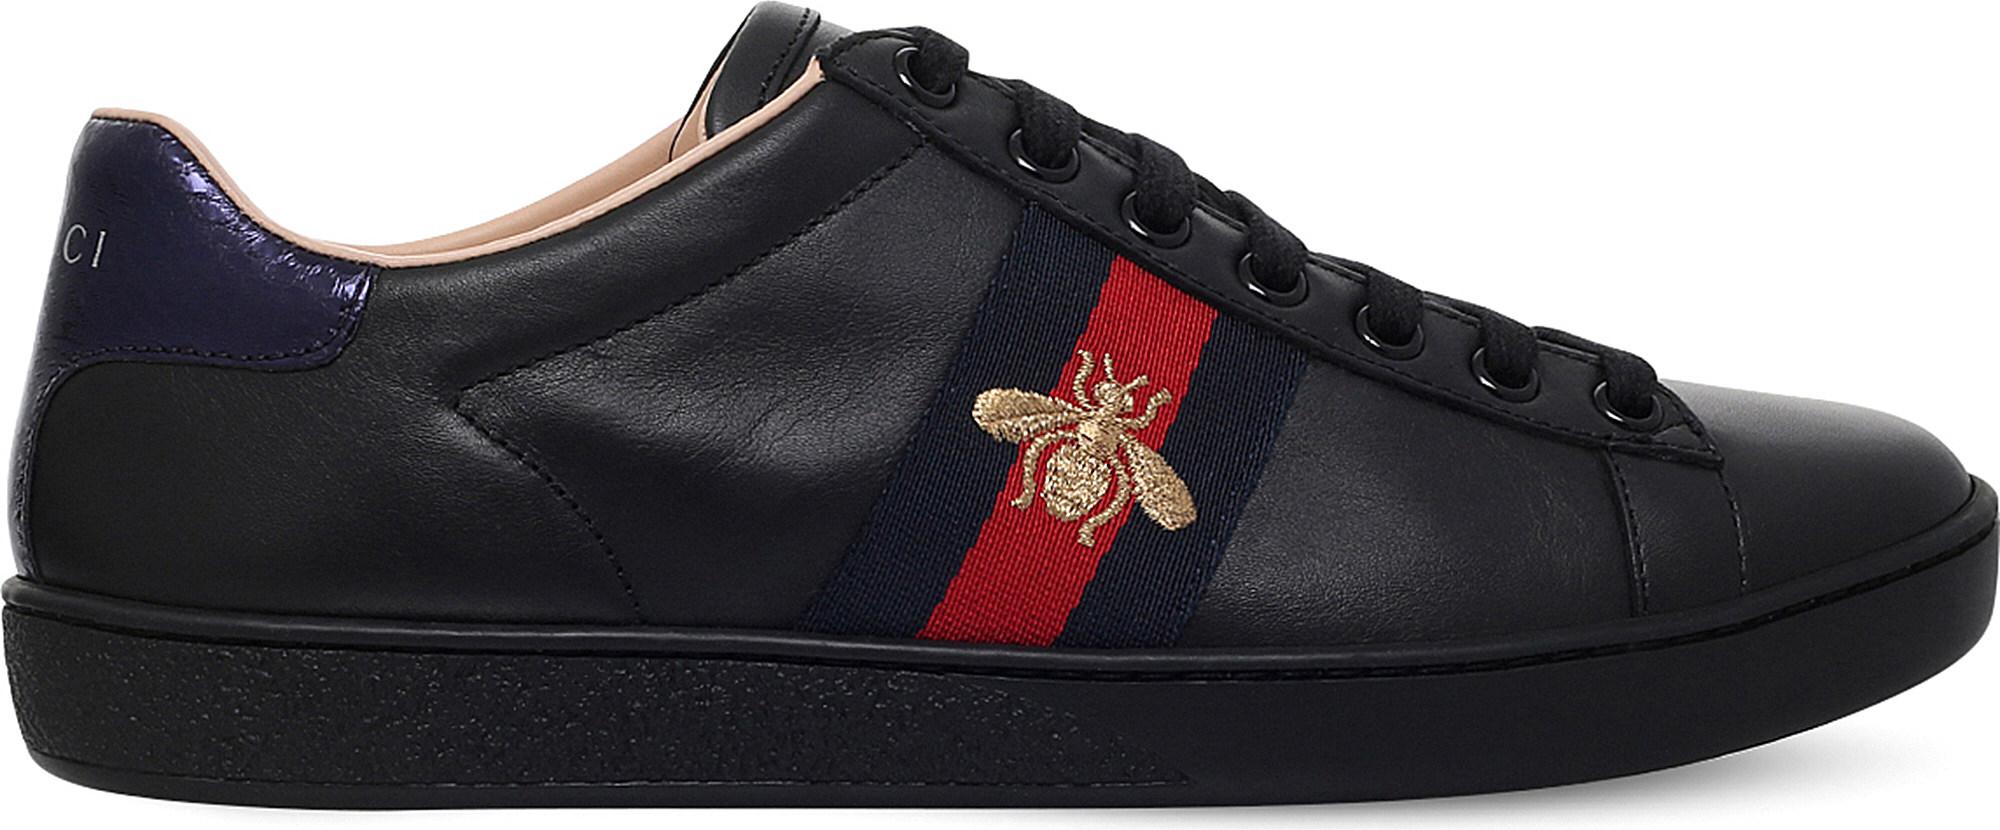 gucci ace trainers black